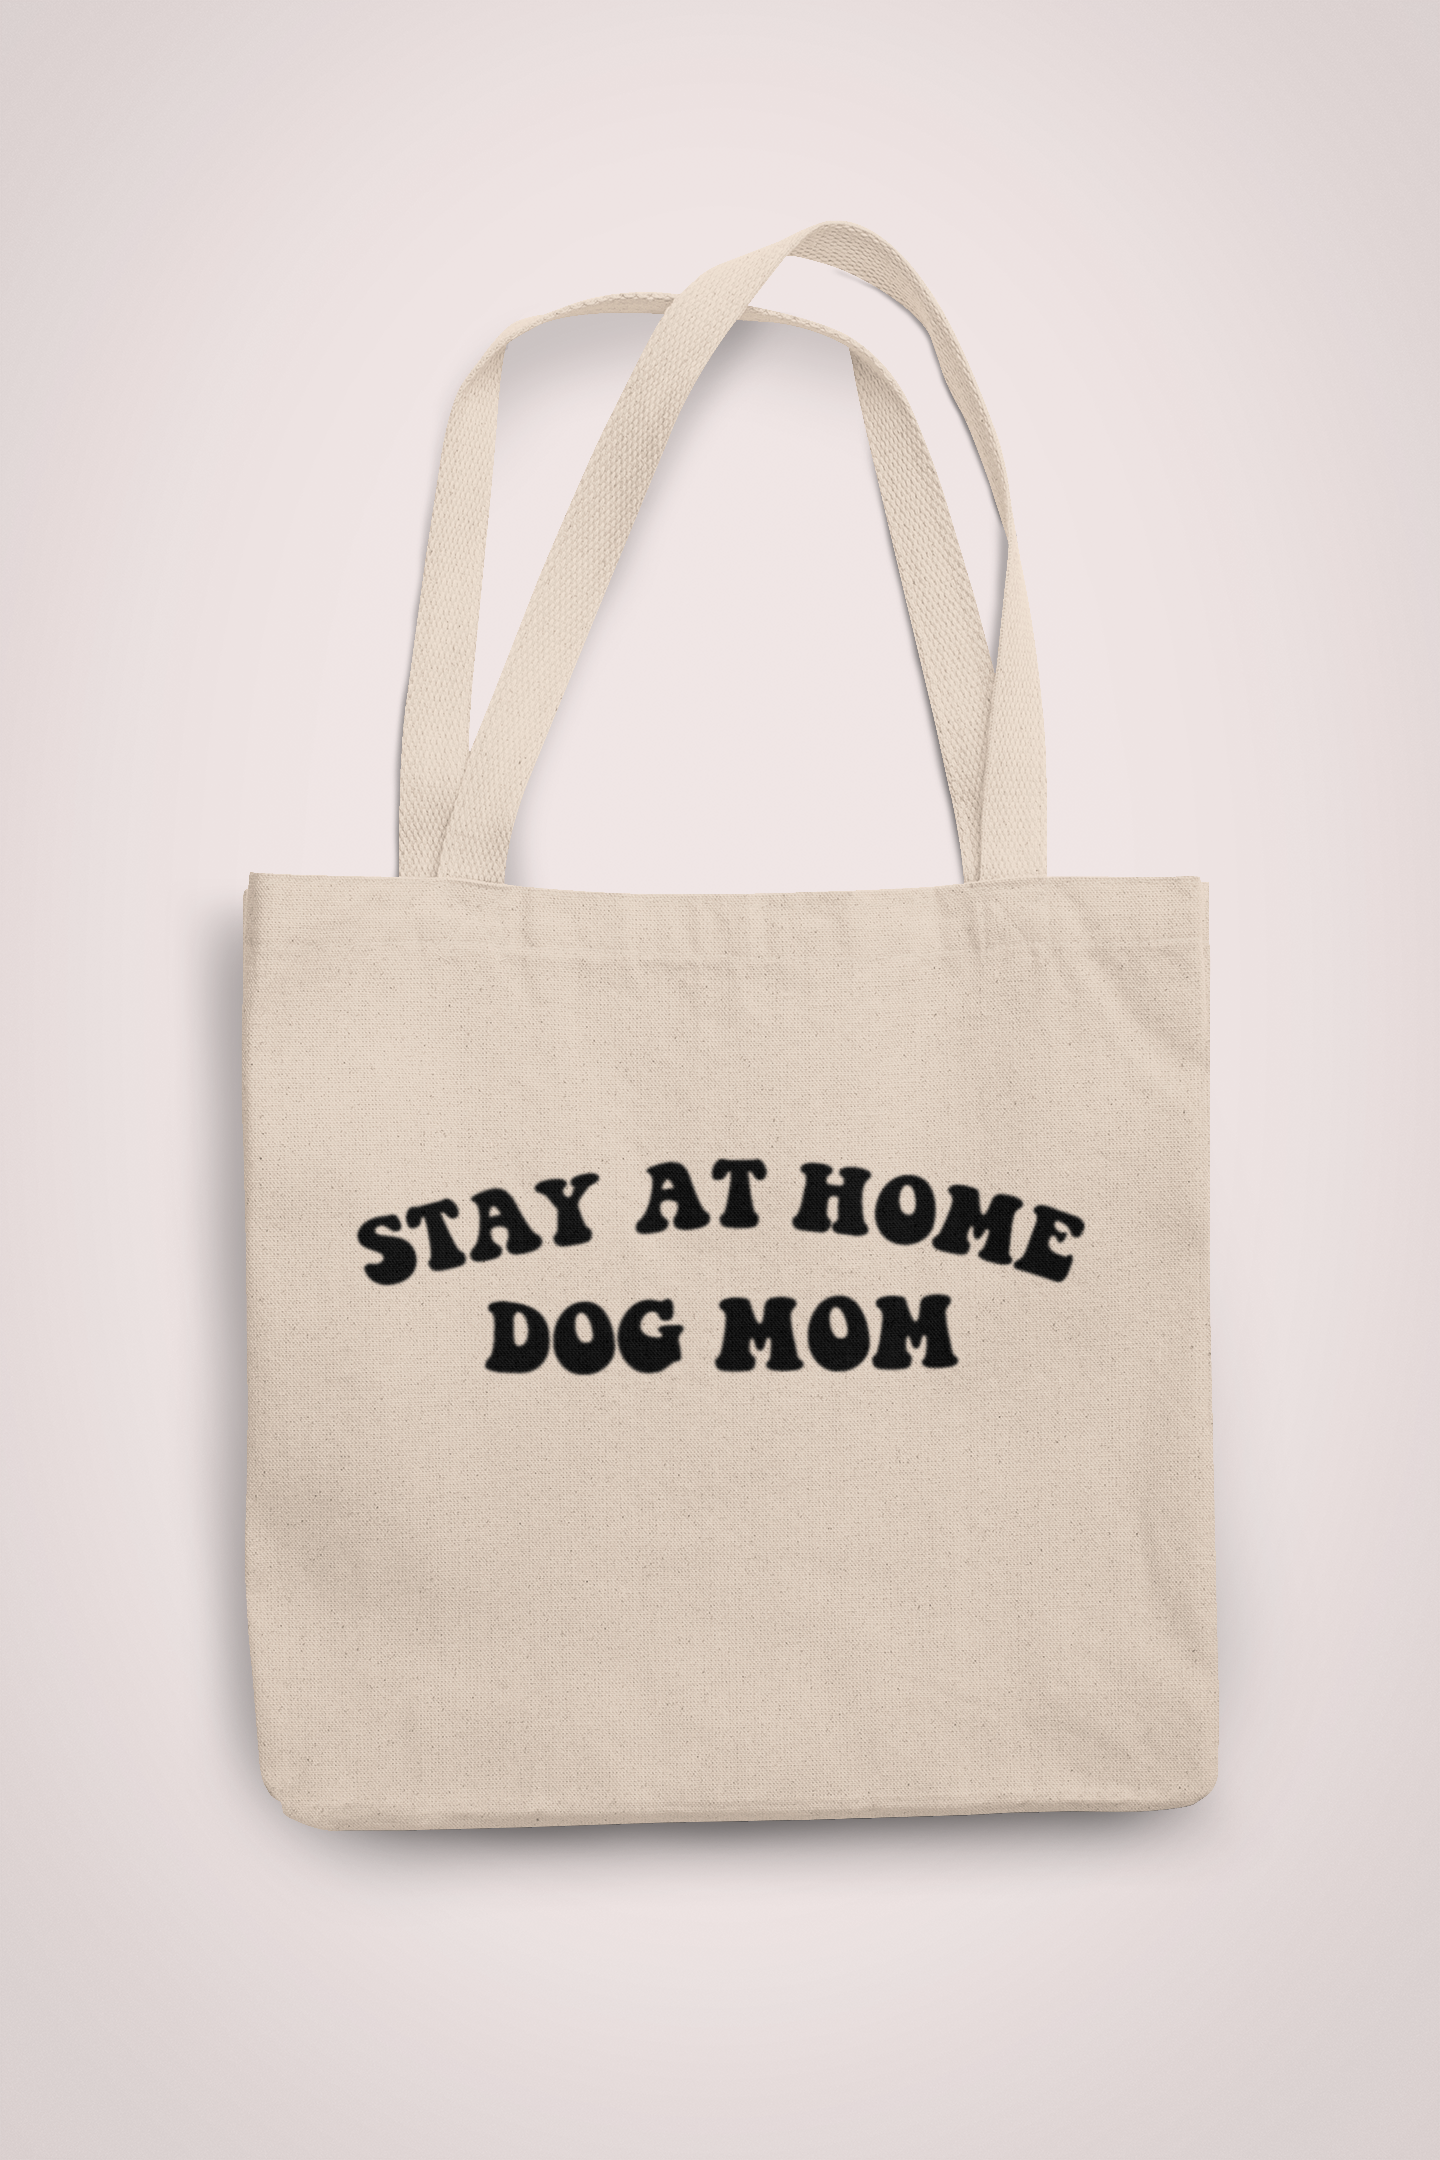 Stay at Home Dog Mom Tote